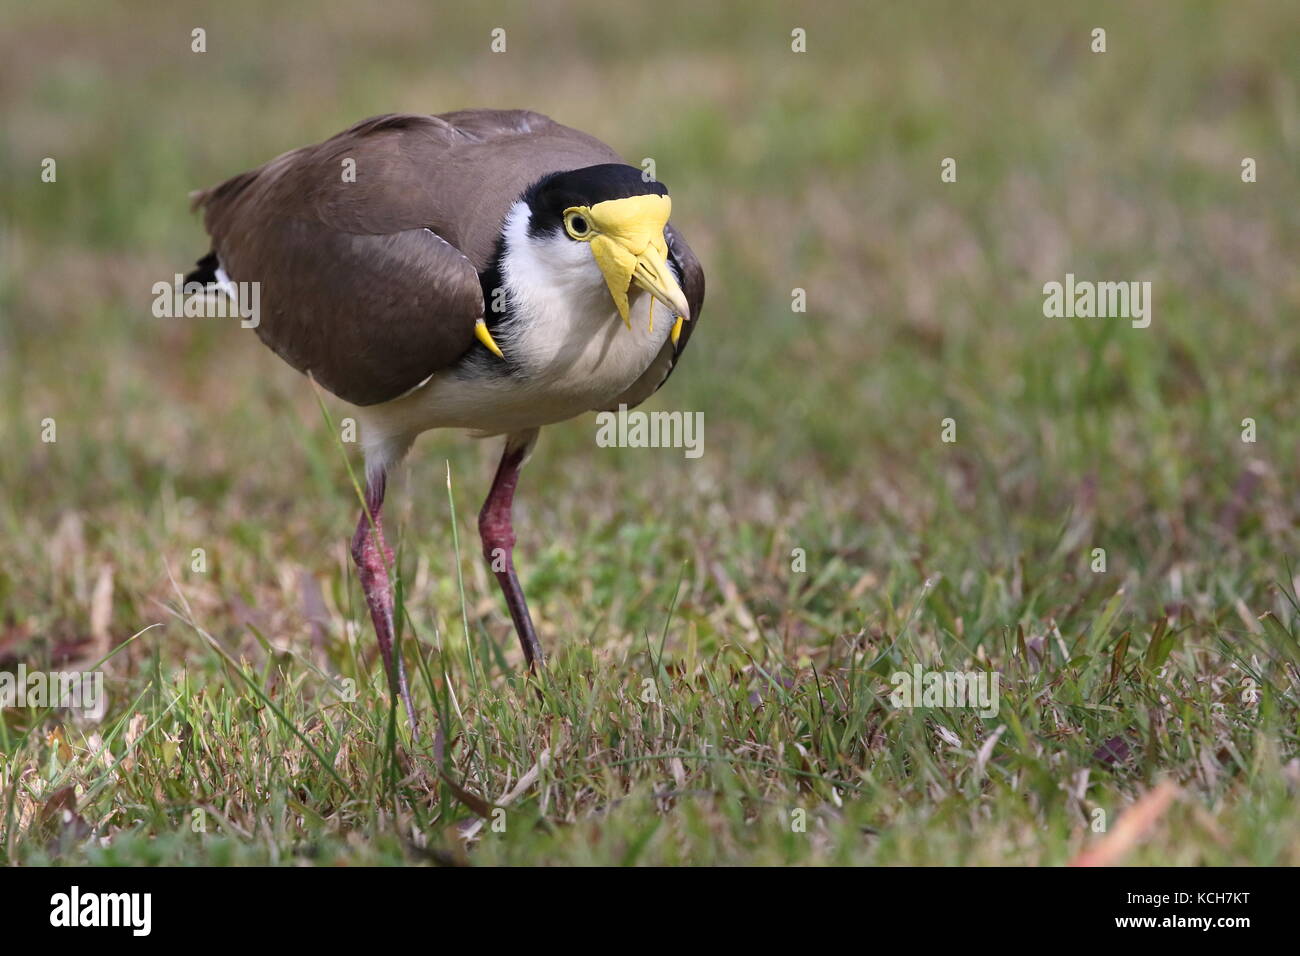 spur-winged lapwing or spur-winged plover Stock Photo